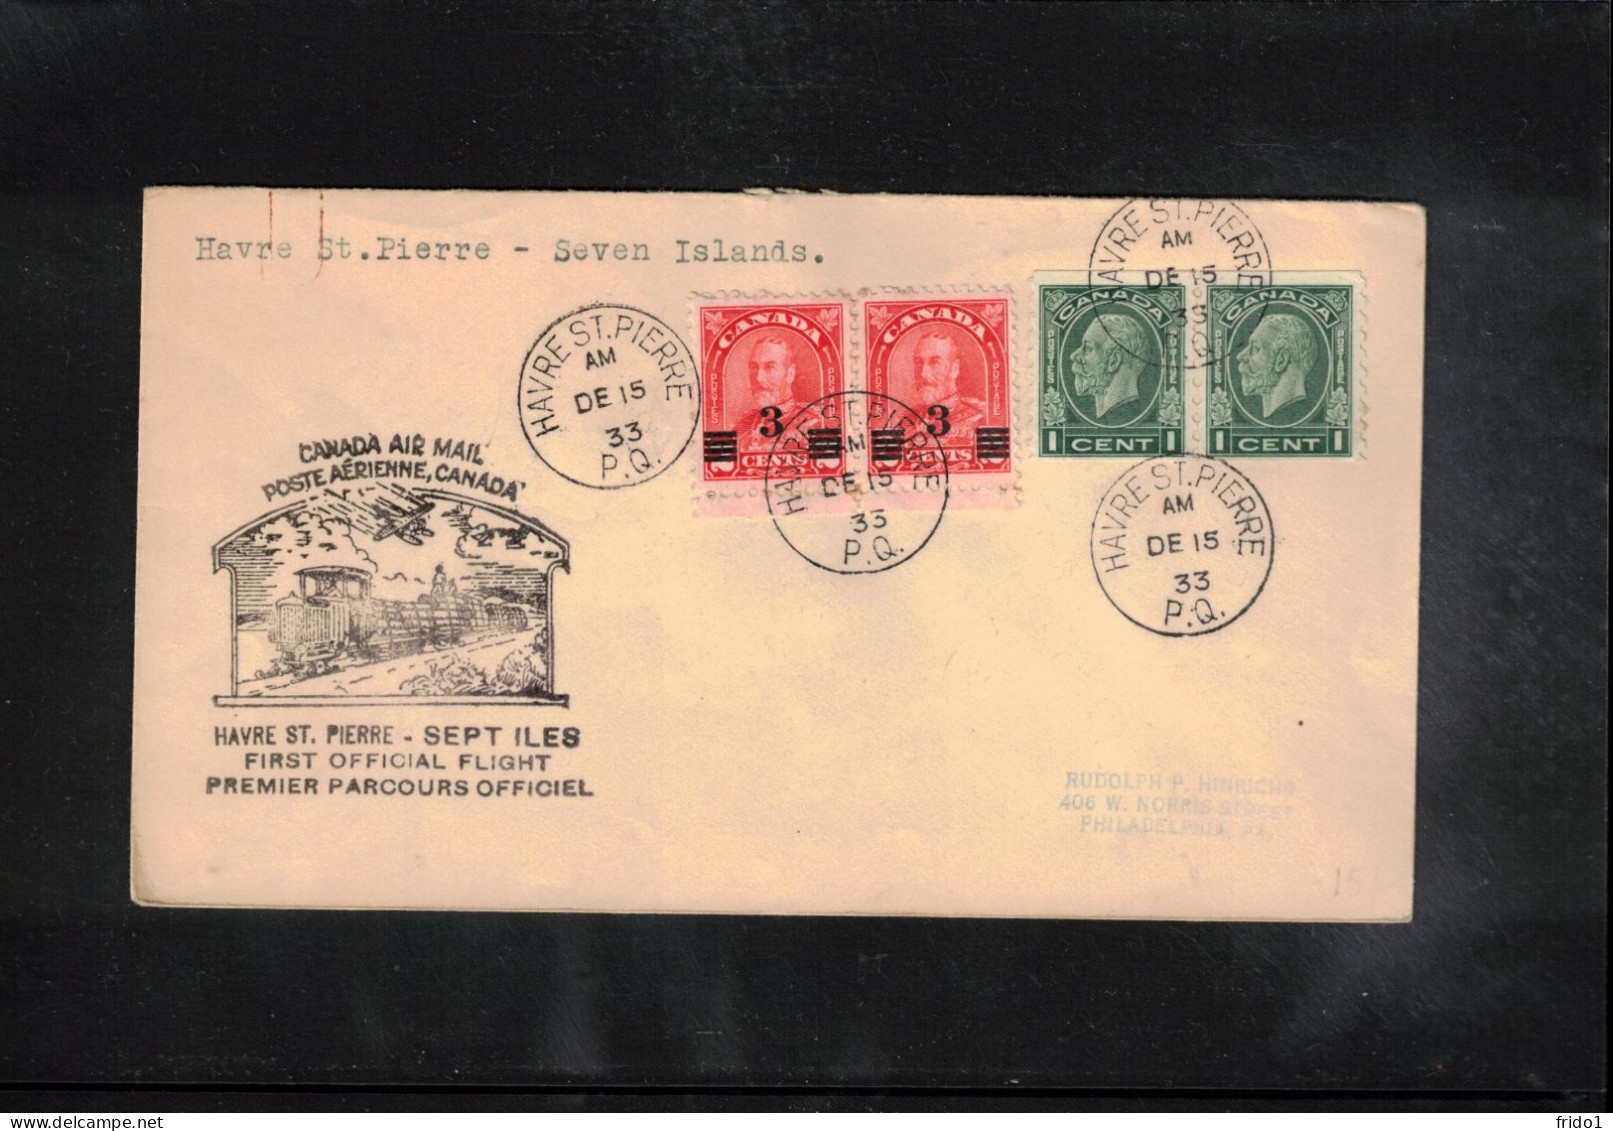 Canada 1933 Canada Air Mail - First Official Flight Havre St.Pierre - Seven Islands - Primi Voli